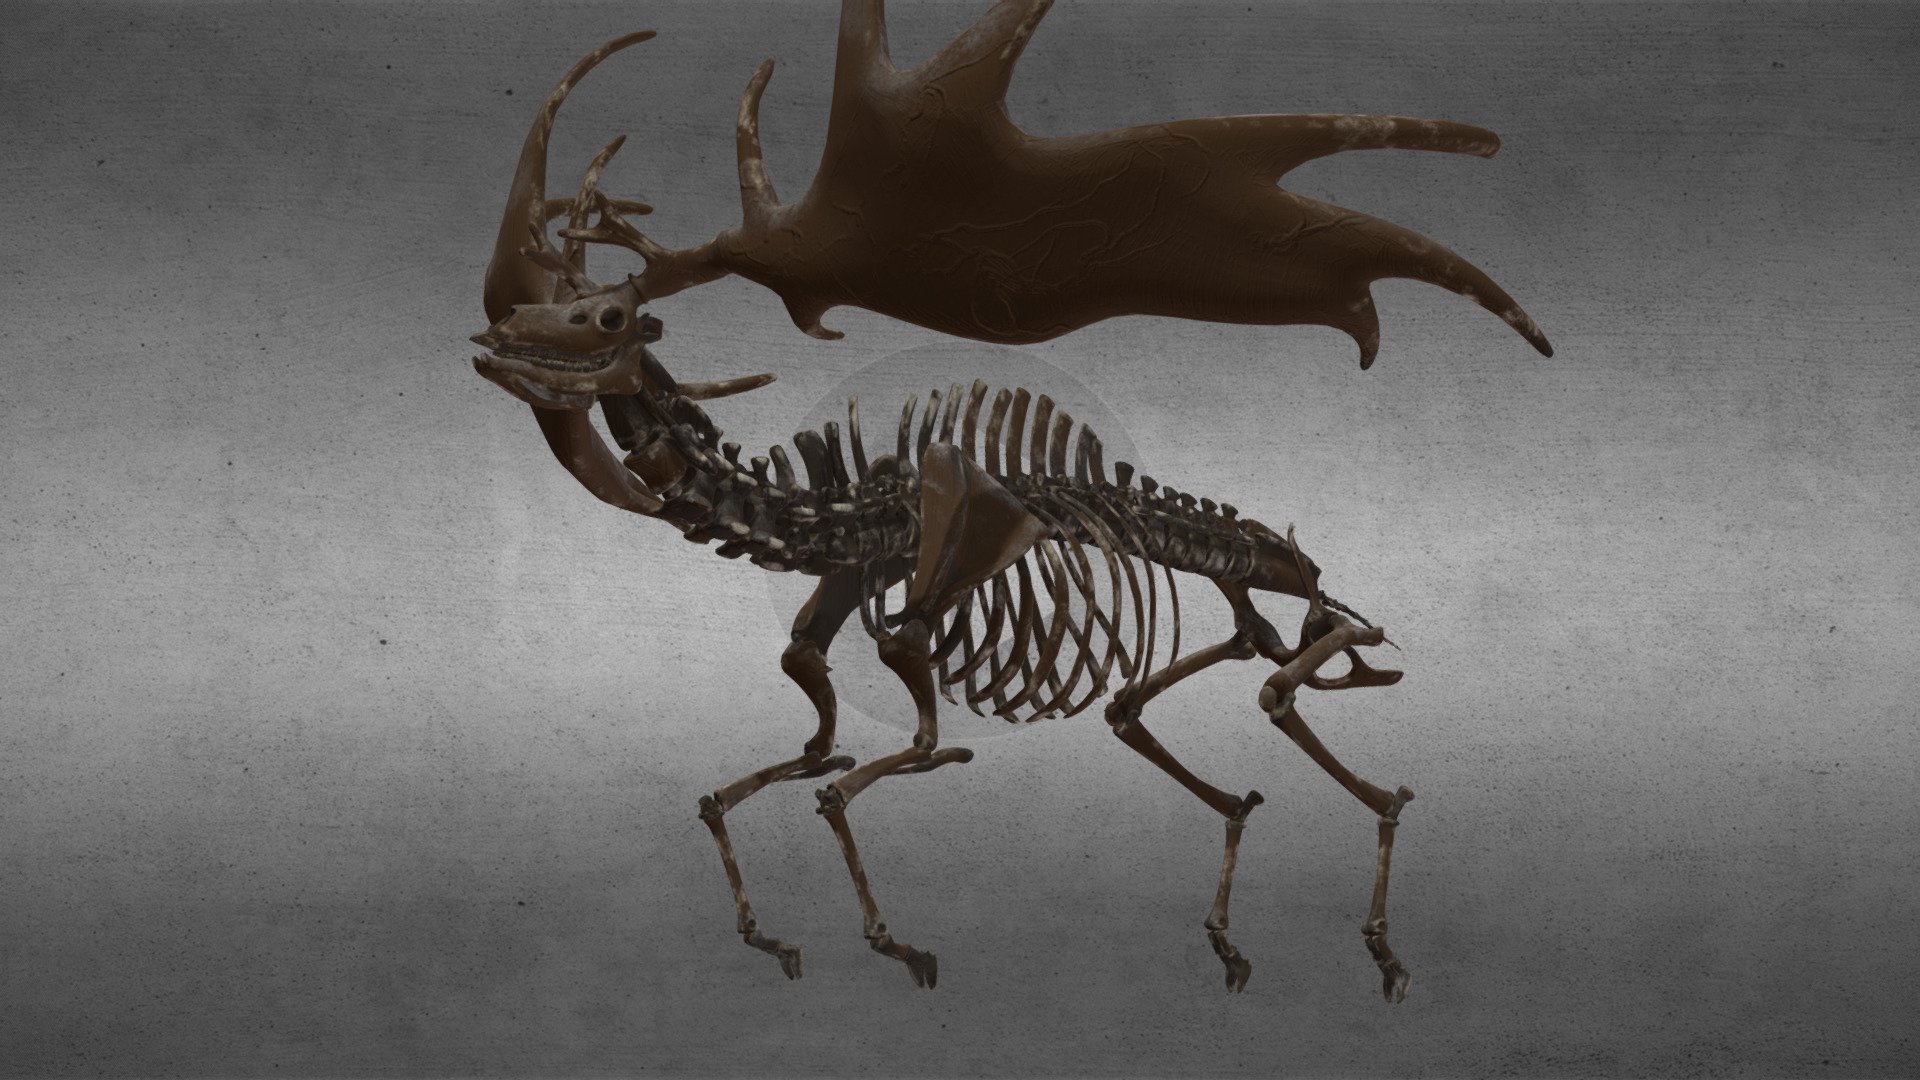 This is a fossil of the extinct Irish deer, which had the largest antlers of any deer that ever lived.

https://en.wikipedia.org/wiki/Irish_elk

I'm no paleontologist, I hope its pretty accurate to the actual fossil 3d model